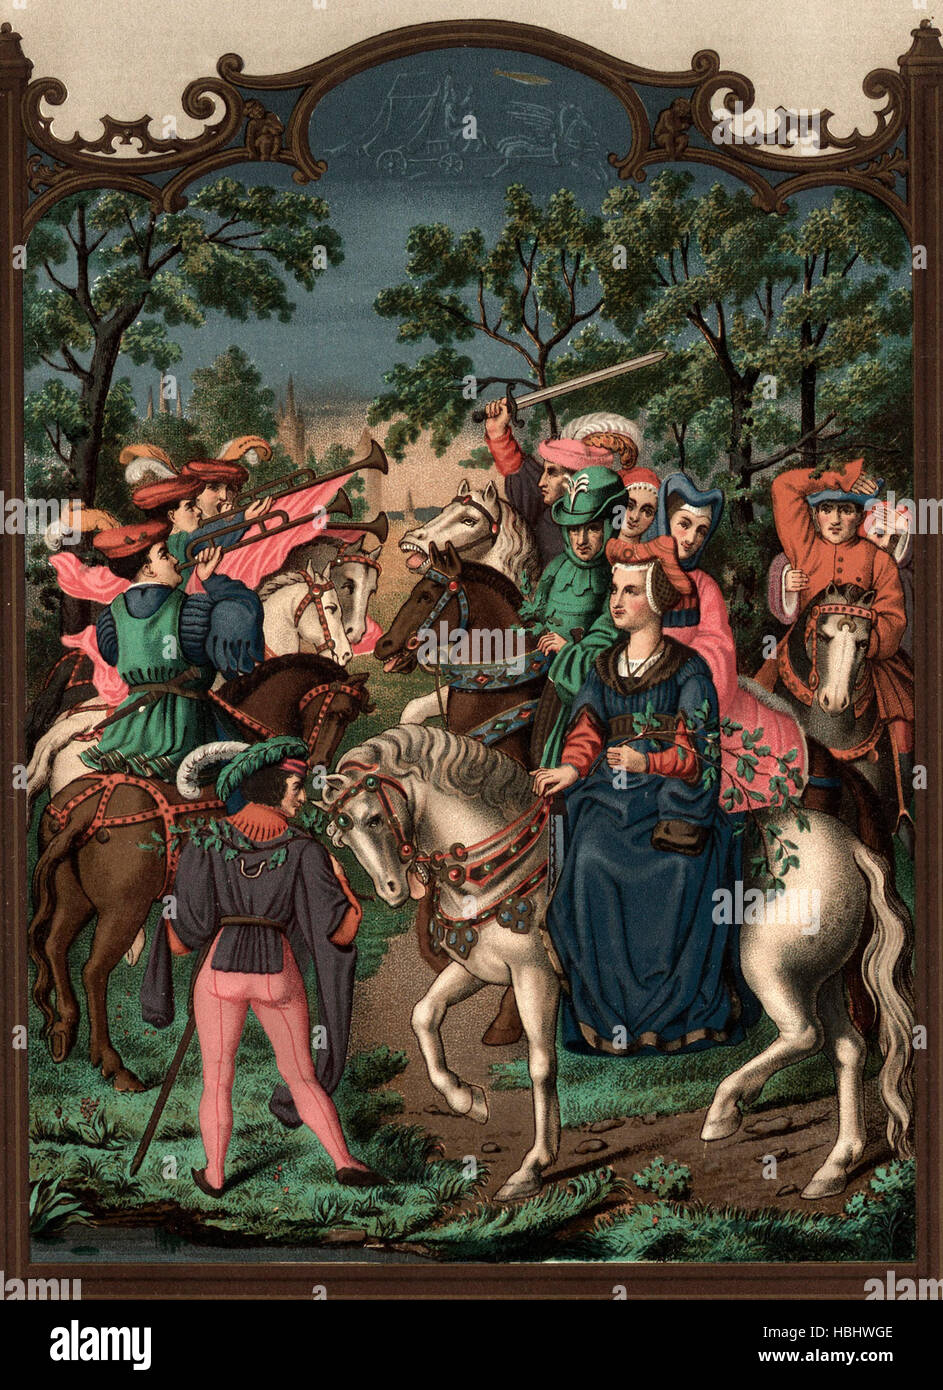 Chateau Life starting for the Promenade - The hostess is seen at the head of the cortege, riding a hackney, with a page in immediate attendance. To the right is the host dressed in green, the cavalcade being preceded by trumpets - Middle Age scene Stock Photo